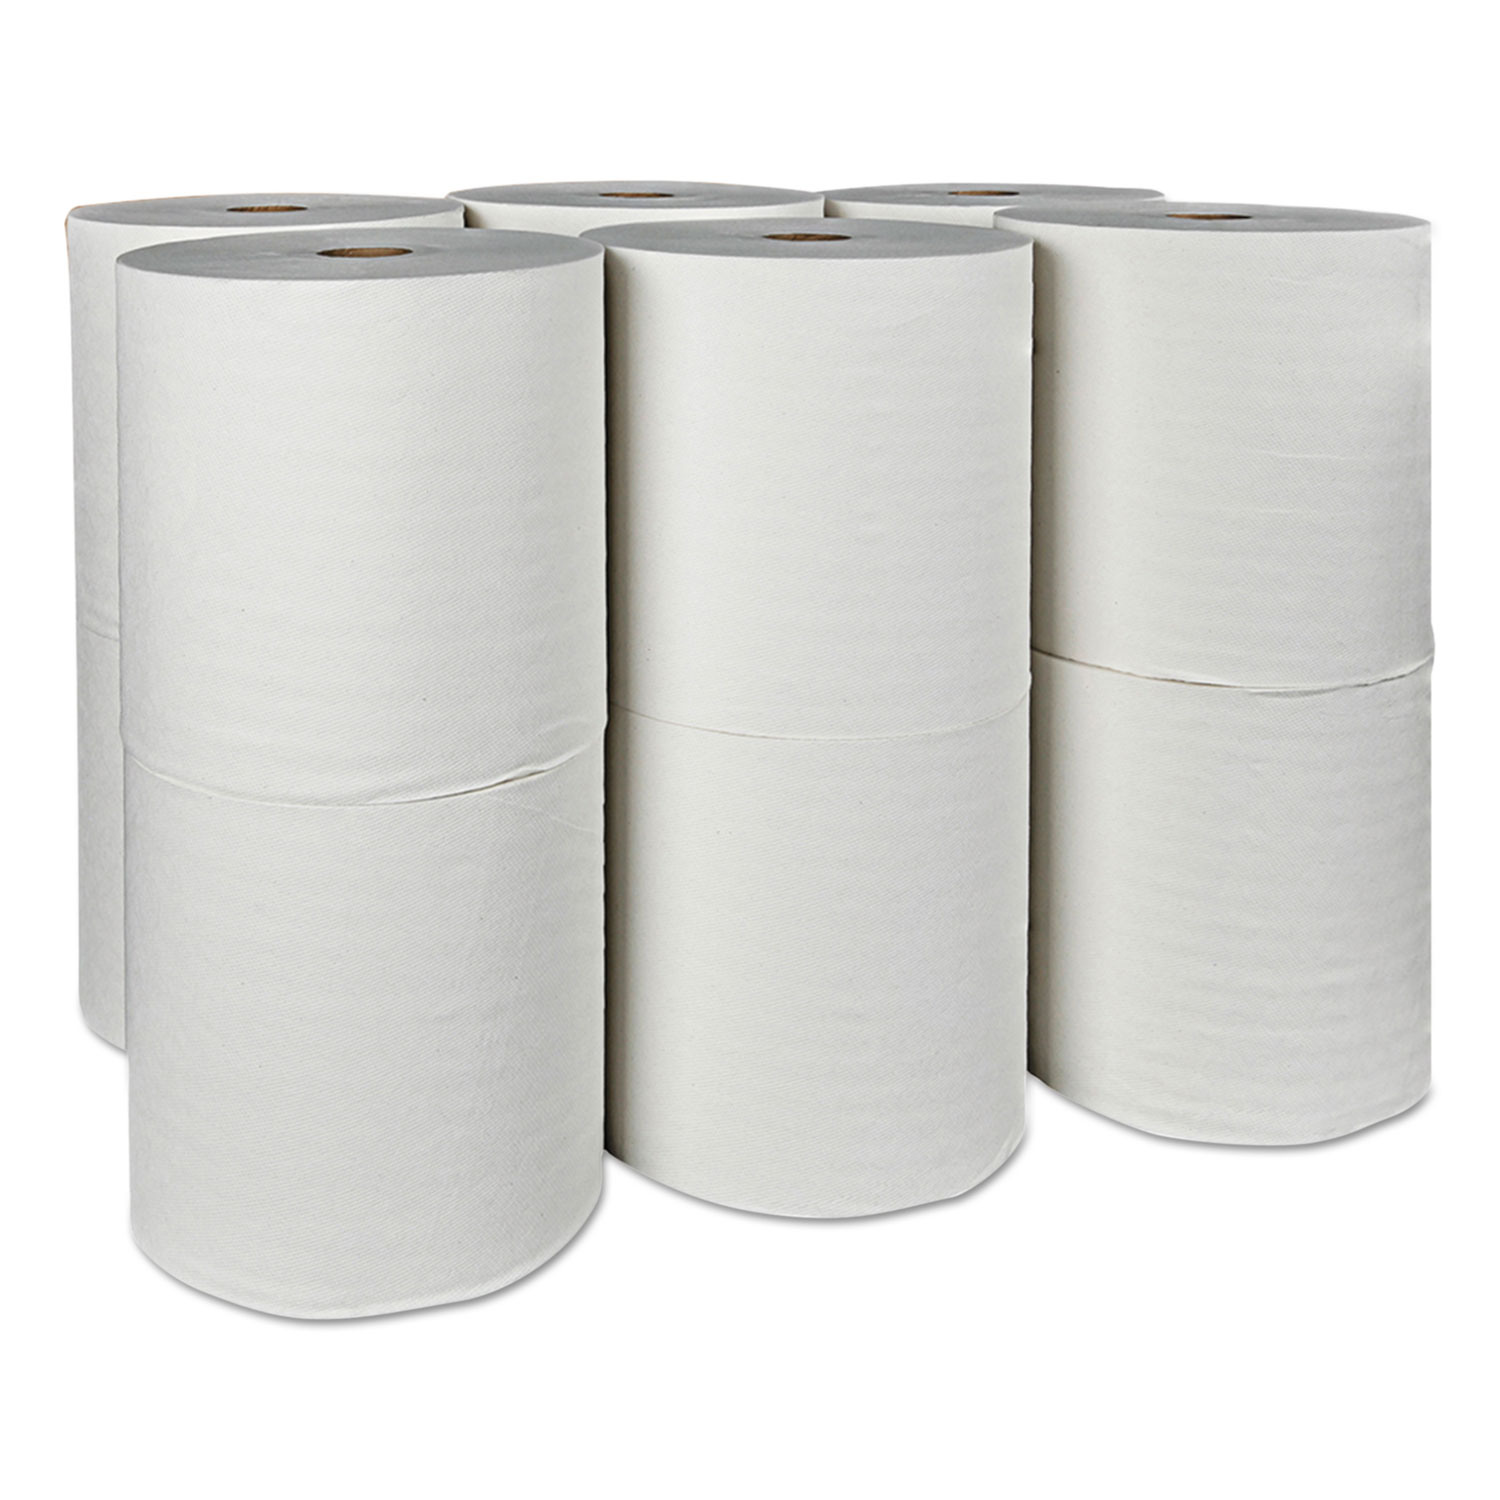 Oasis 1 Ply Hardwound Roll Towel - 10 x 800', White